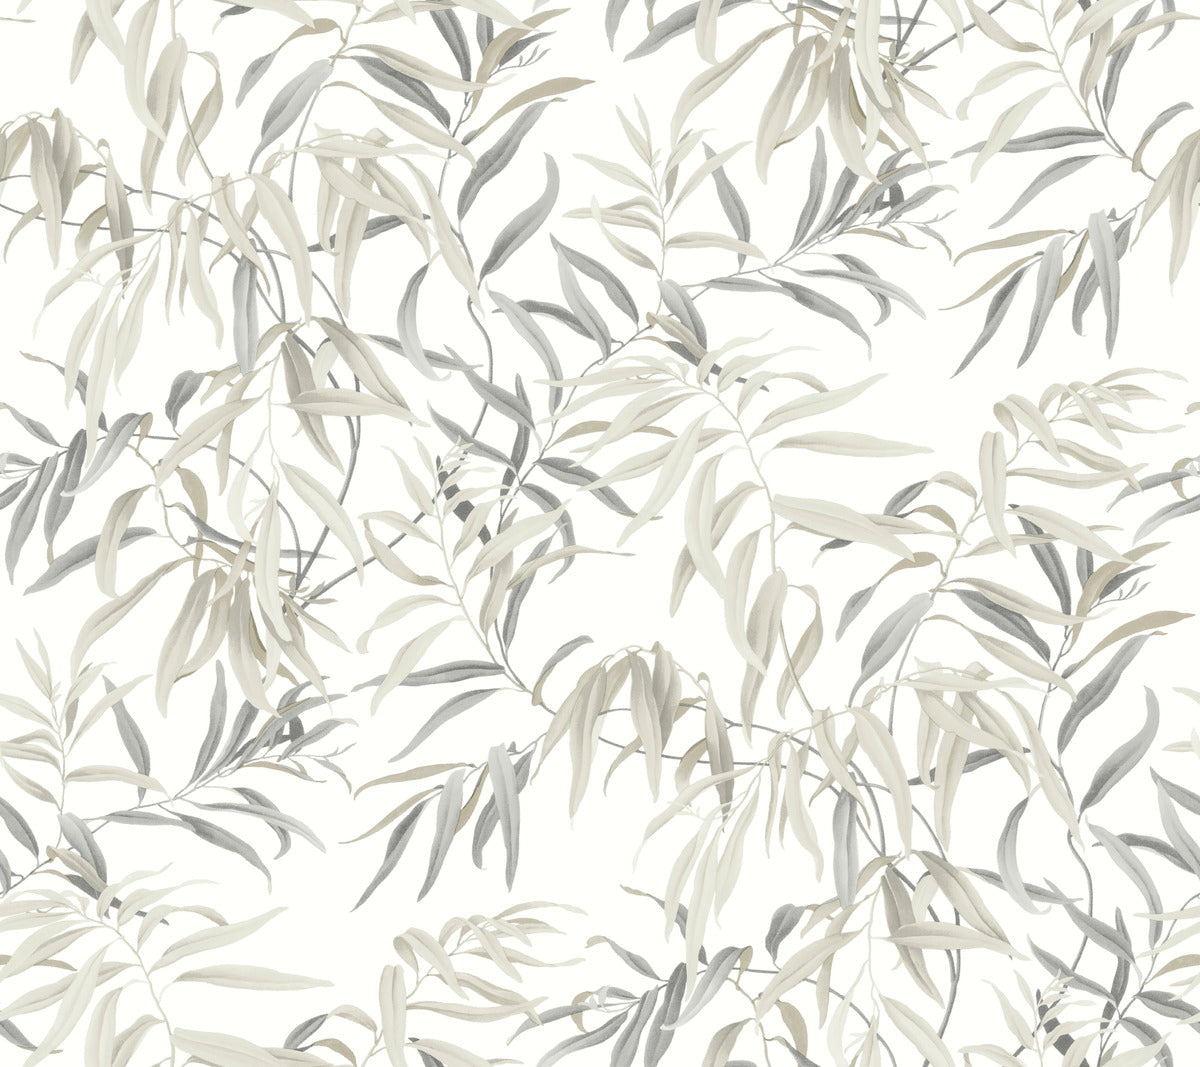 A seamless pattern featuring delicate leafy branches in various shades of gray and beige against a white background. The design is organic and flowing, reminiscent of eucalyptus leaves, adding a subtle, elegant touch to your space with York Wallcoverings' Willow Grove Clay Wallpaper Pink (60 Sq.Ft.) for a perfect botanical retreat.